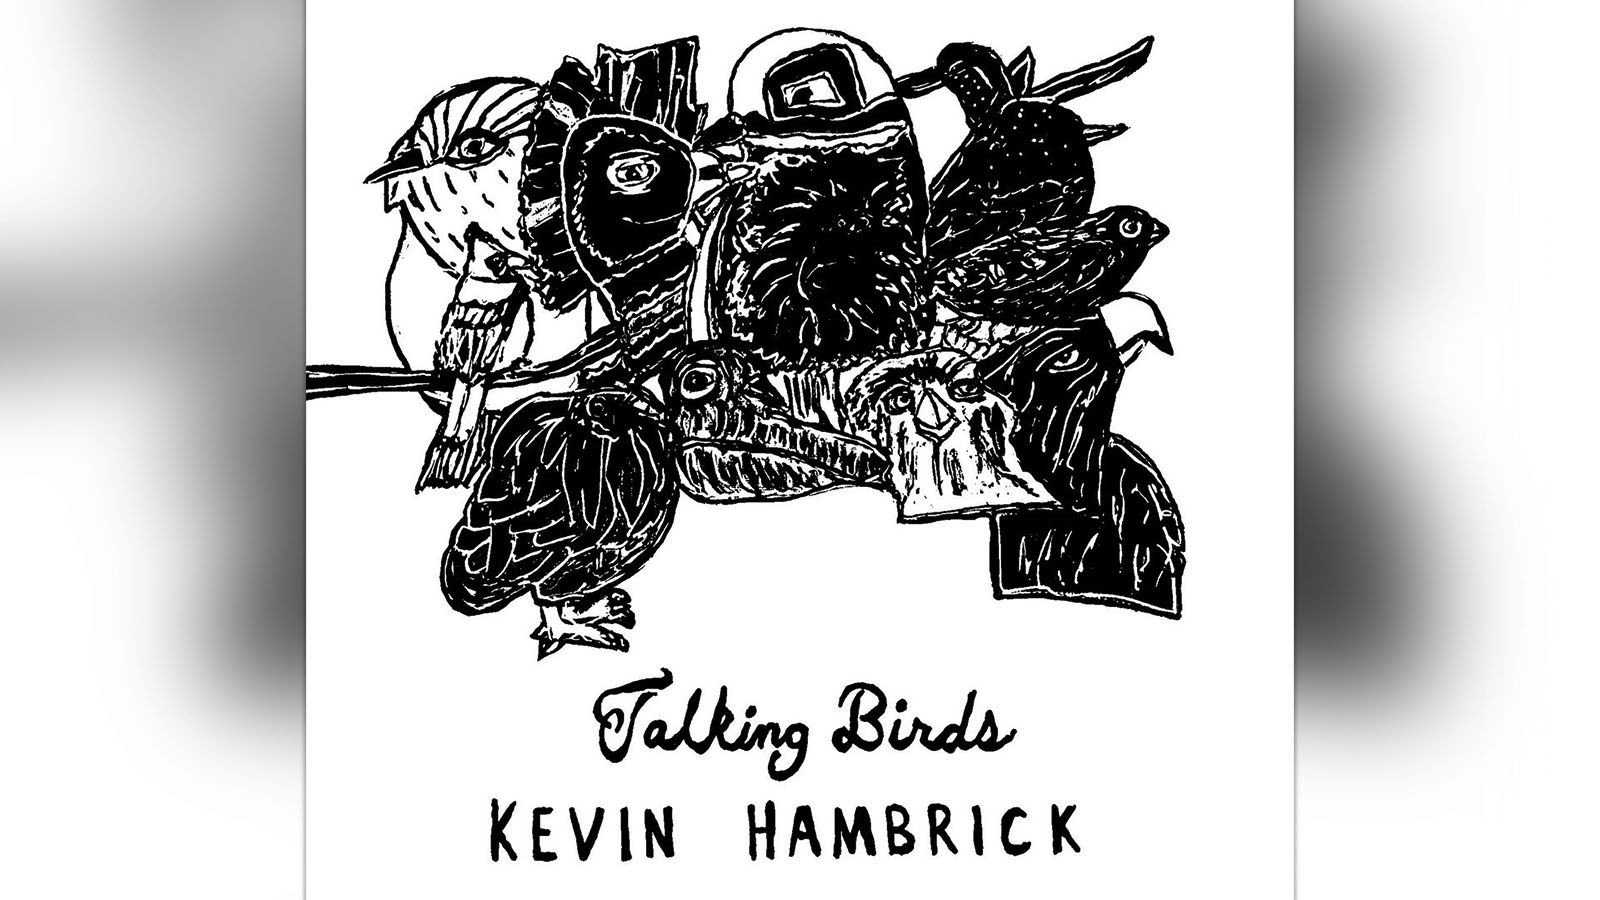 Kevin Hambrick releases another standout album.